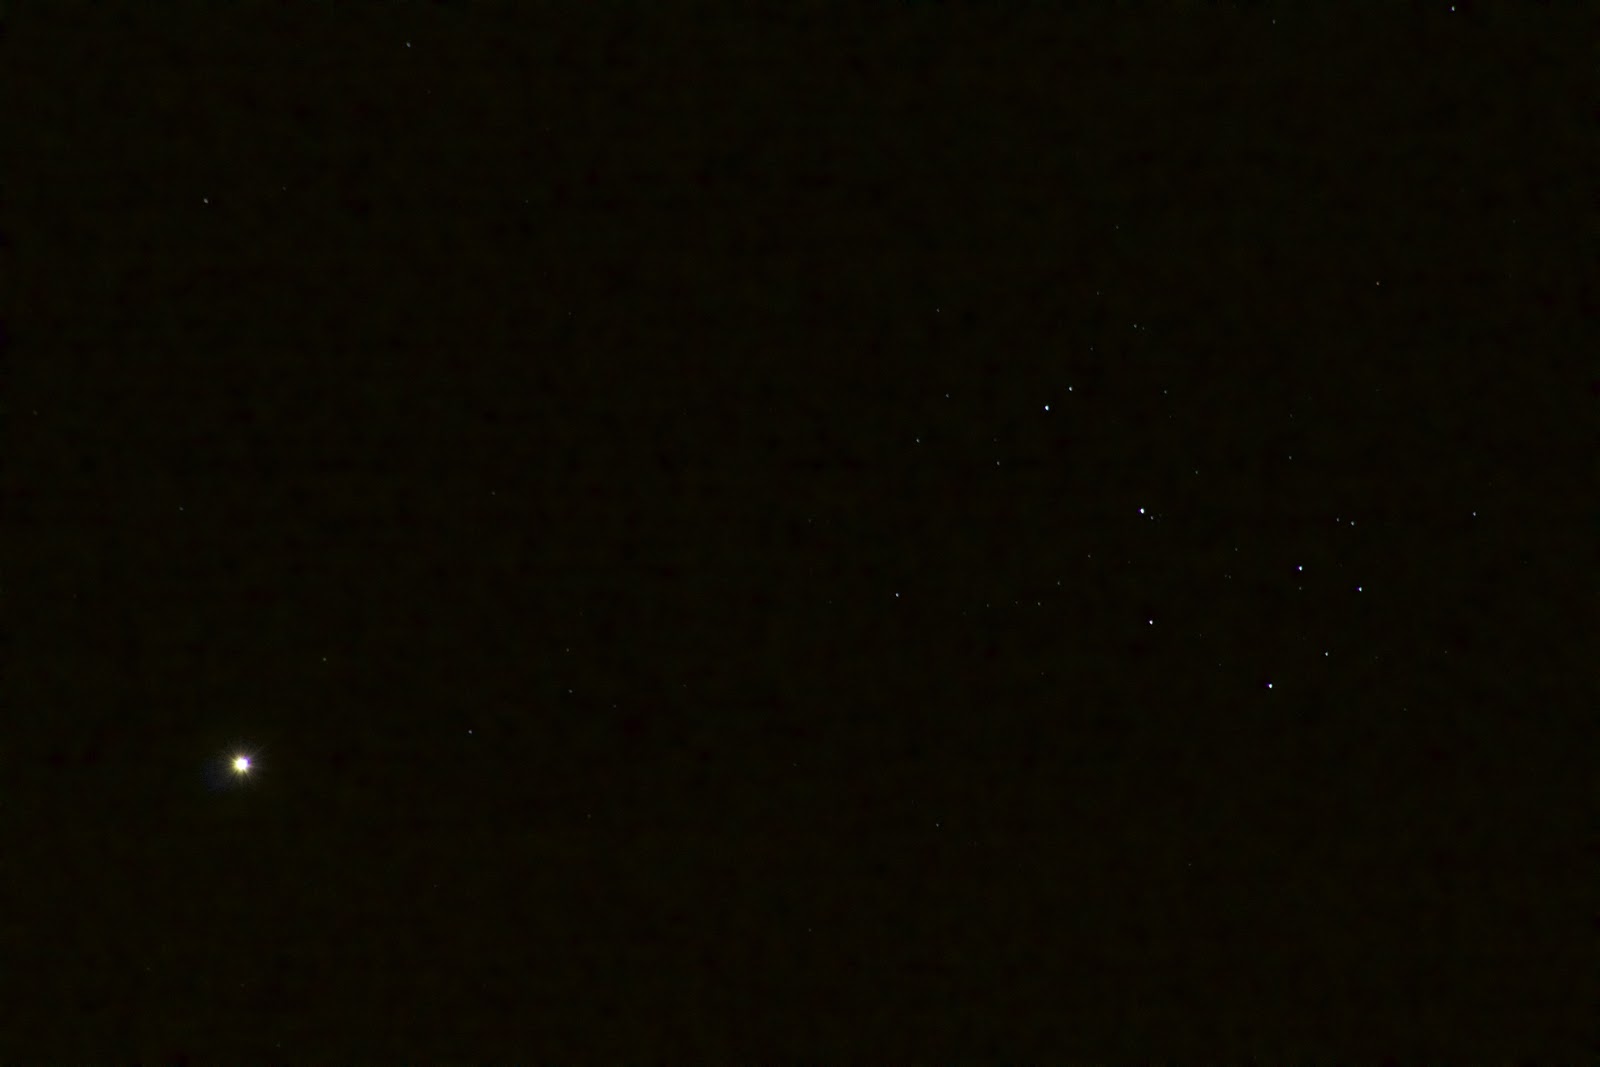 Venus and Pleiades with T5i at 300mm